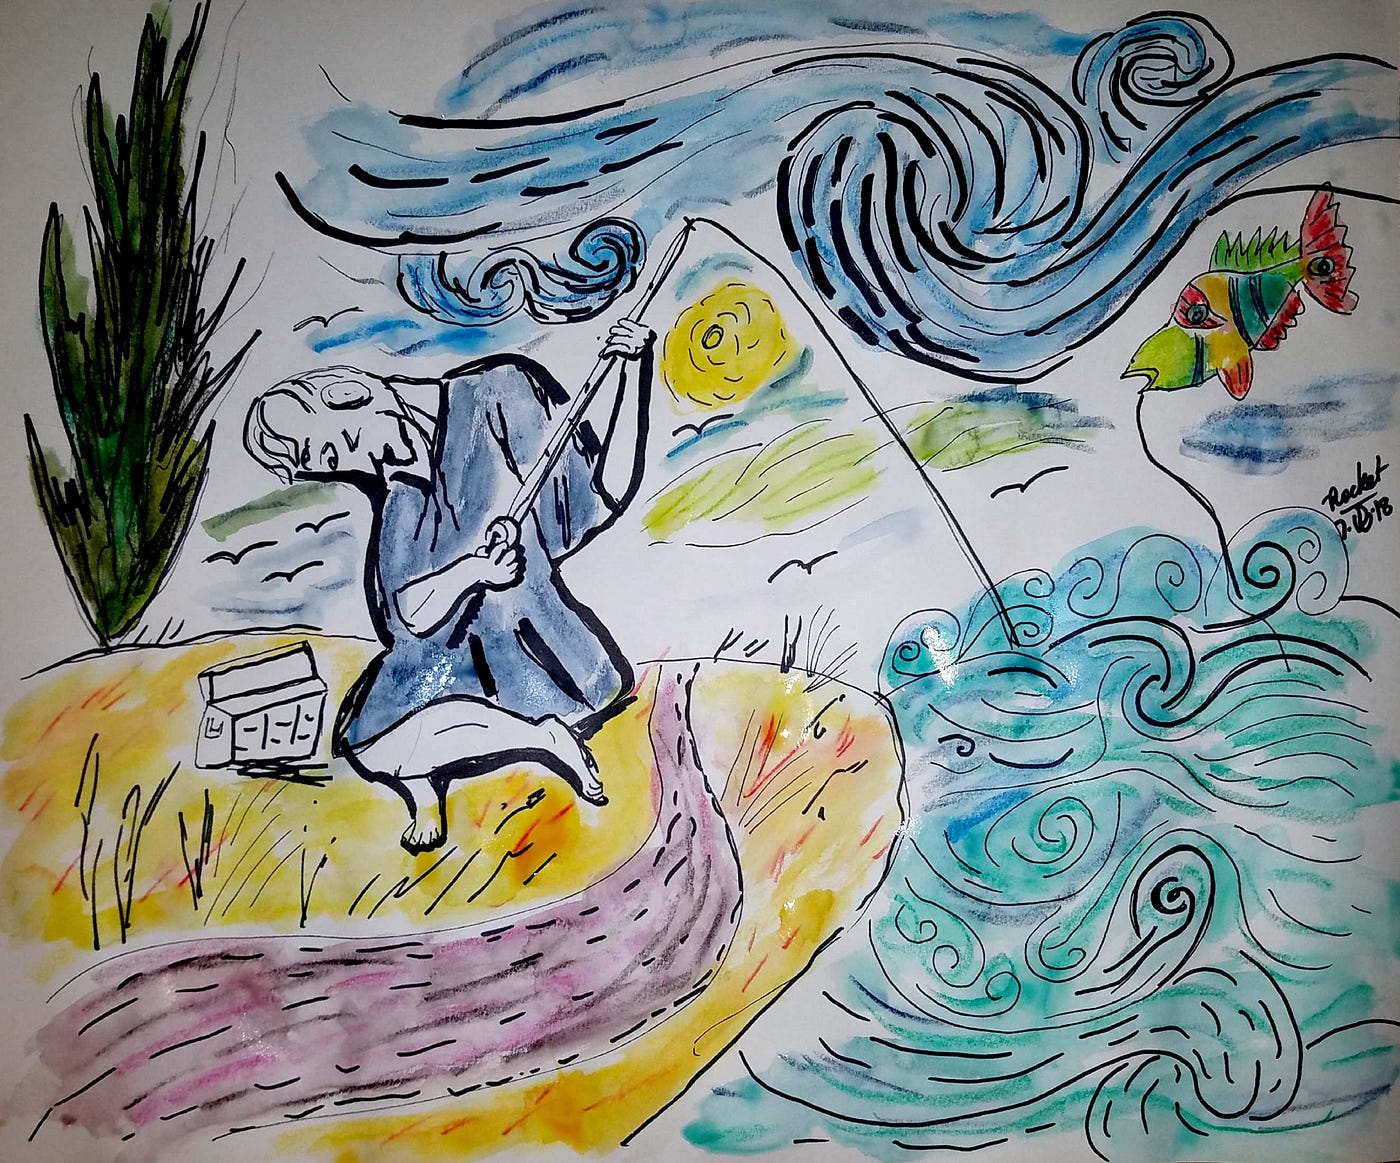 How I deal with insomnia. “Picasso fishing on Lake Van Gogh”, by Rocket  Worley